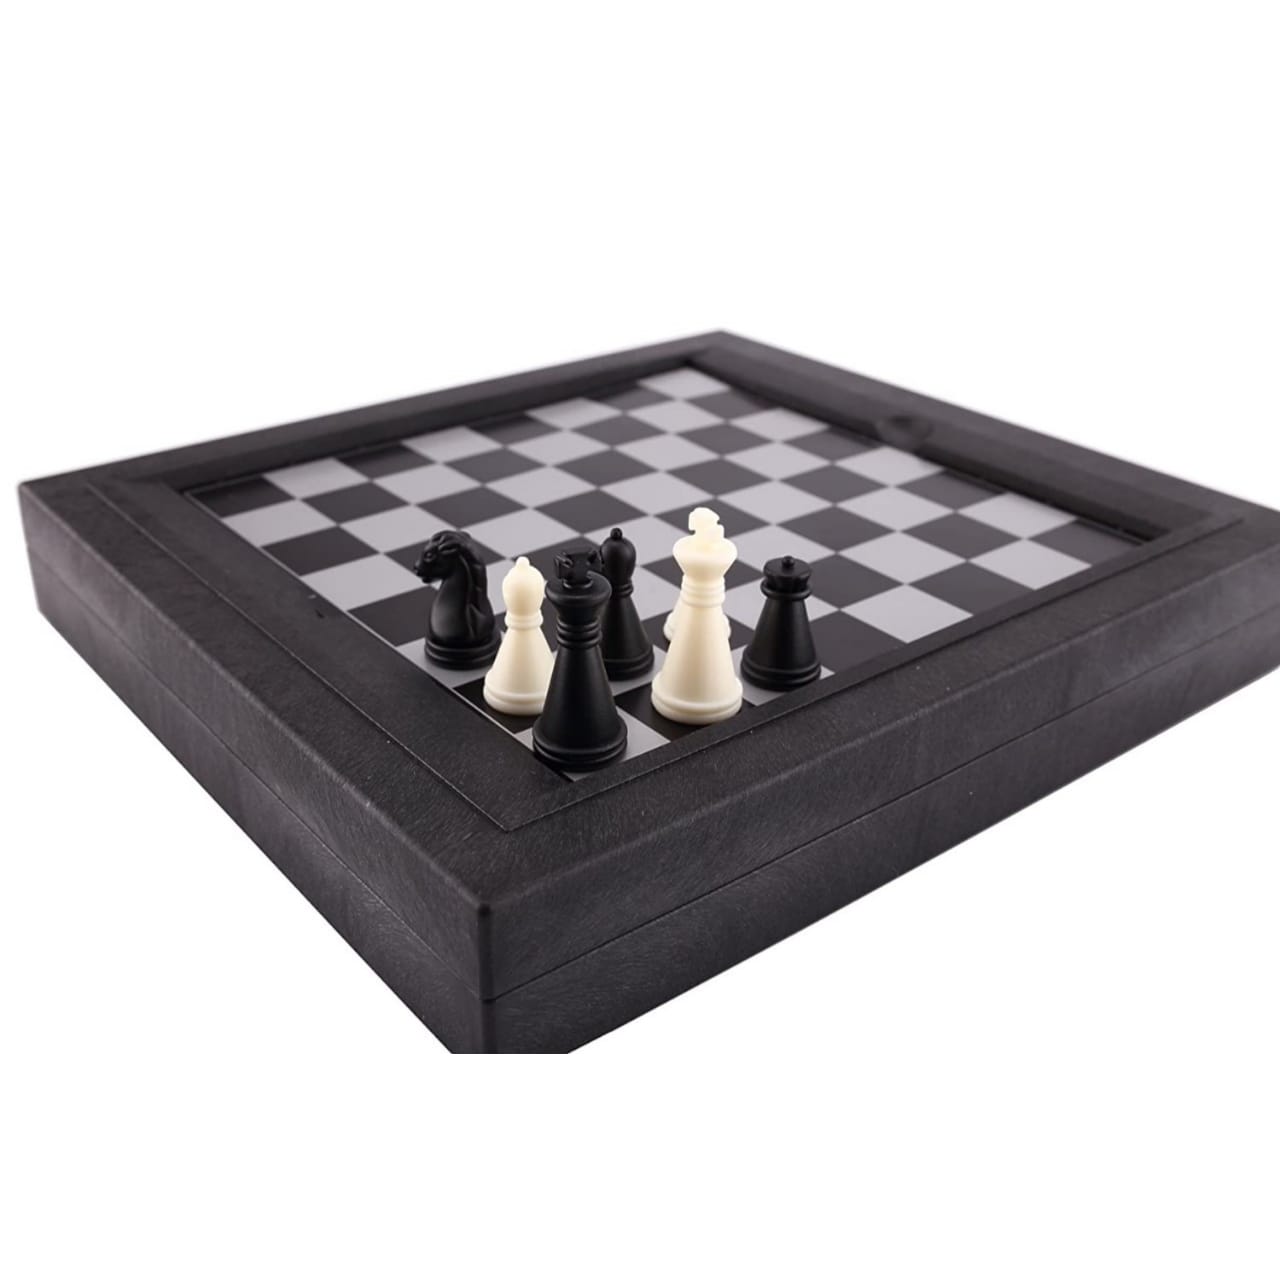 3-in-1 Chess and Checkers and Backgammon Folding Board Games For Kids and Adults